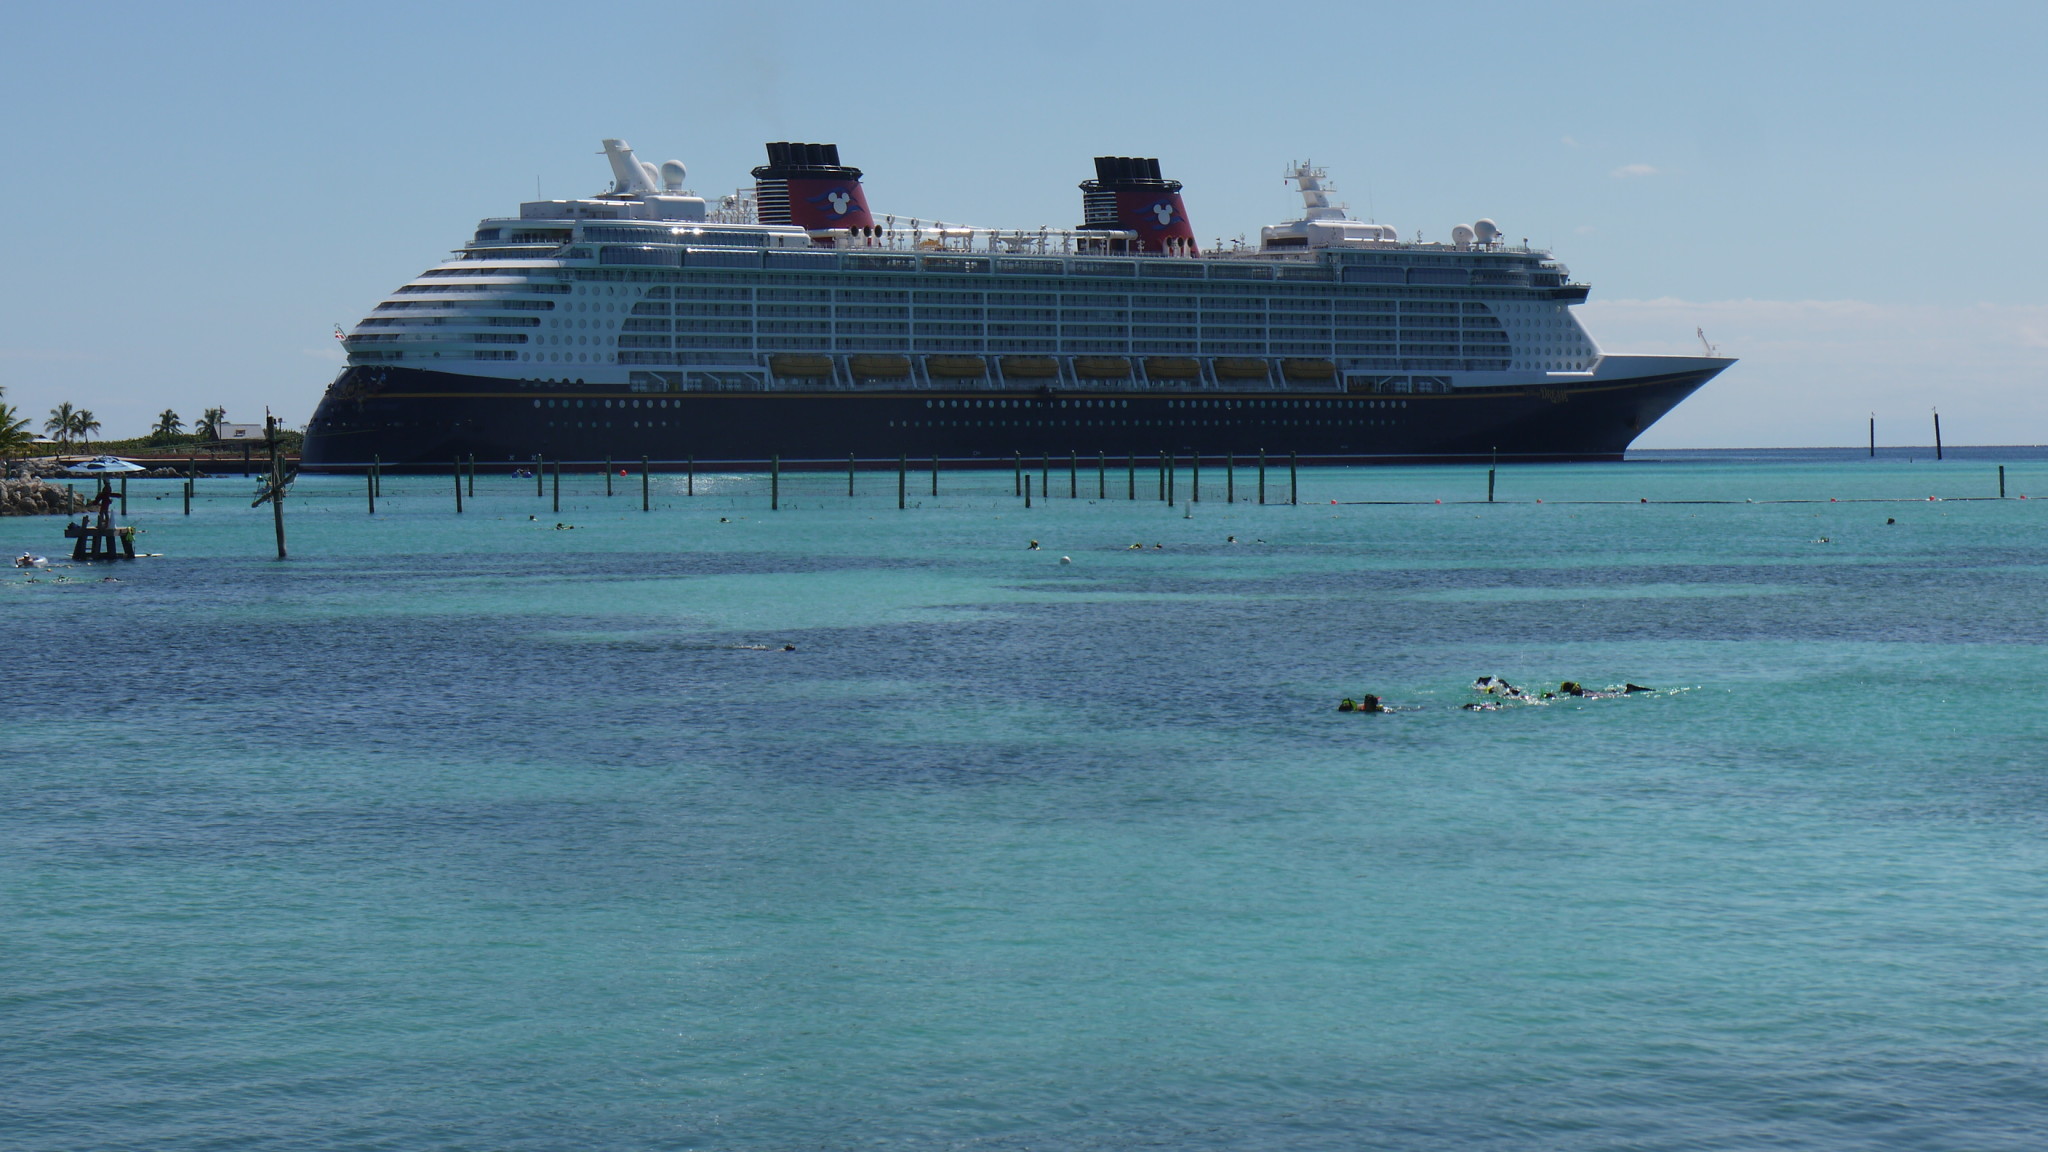 Disney Cruise Line Dominates the Seas! Voted Best Cruise Line for Families 2014